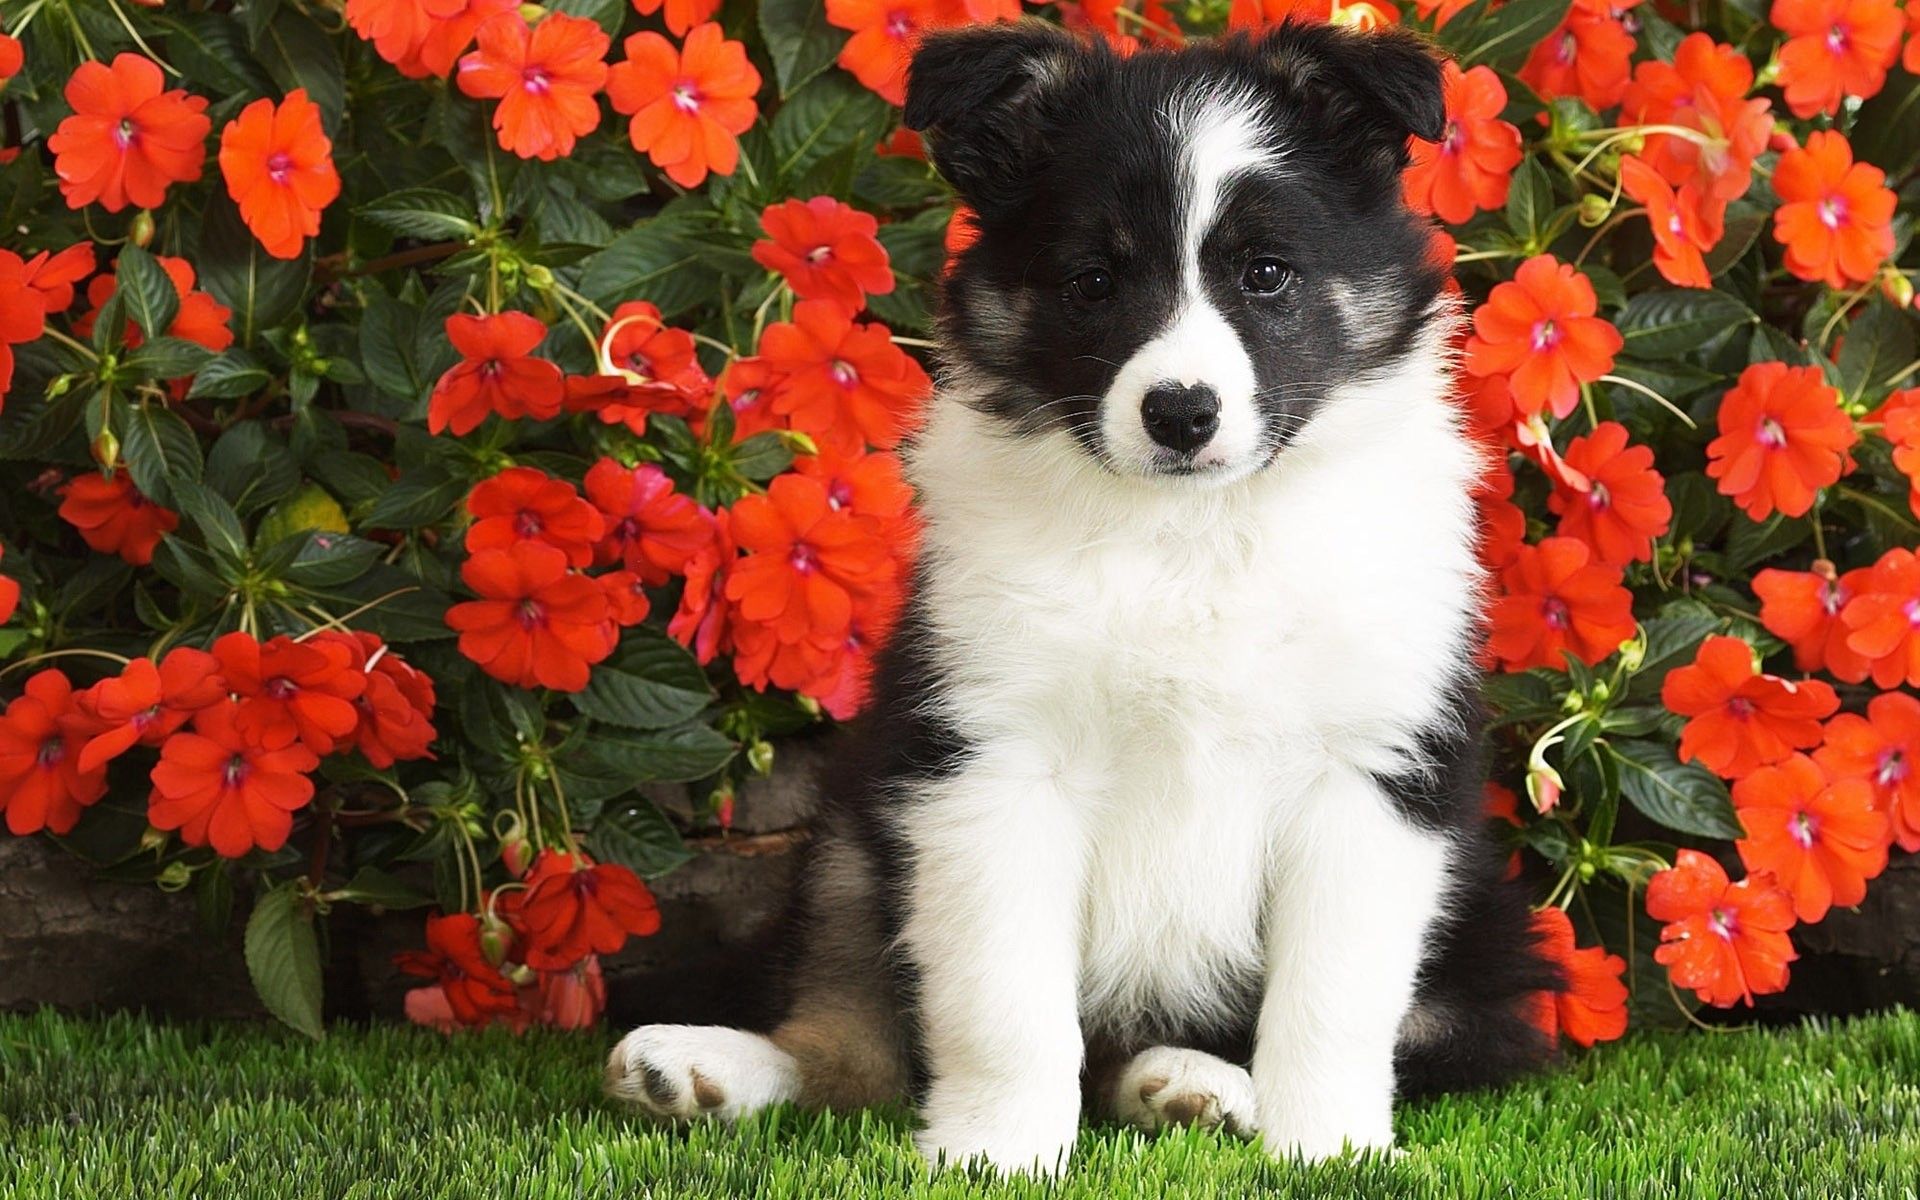 Dog, Puppy, Black, White, Spotted, Flowers wallpaper